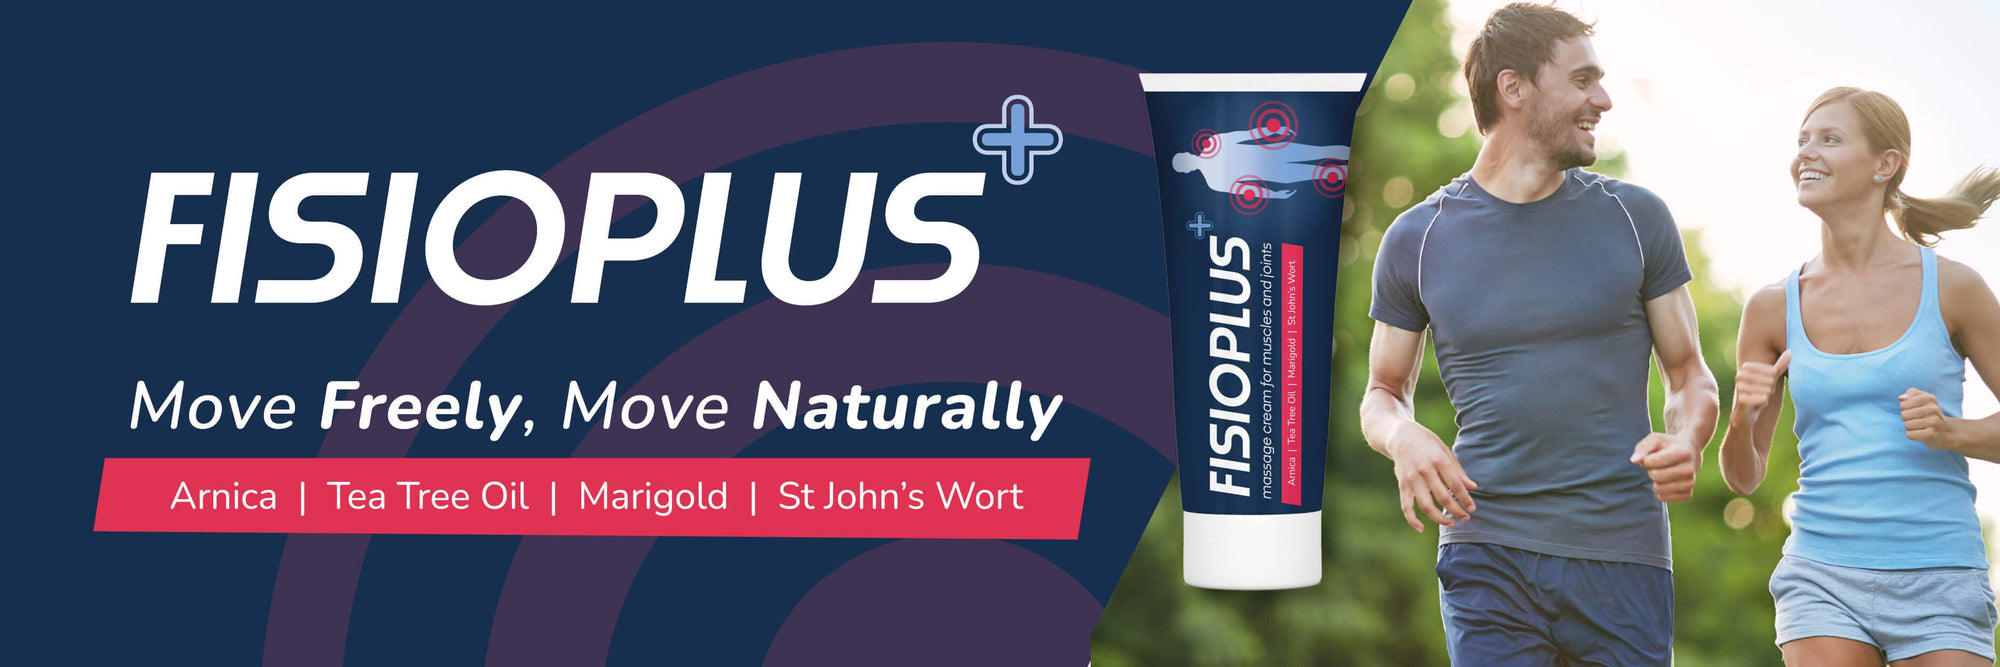 Fisioplus muscle and joint pain relief 